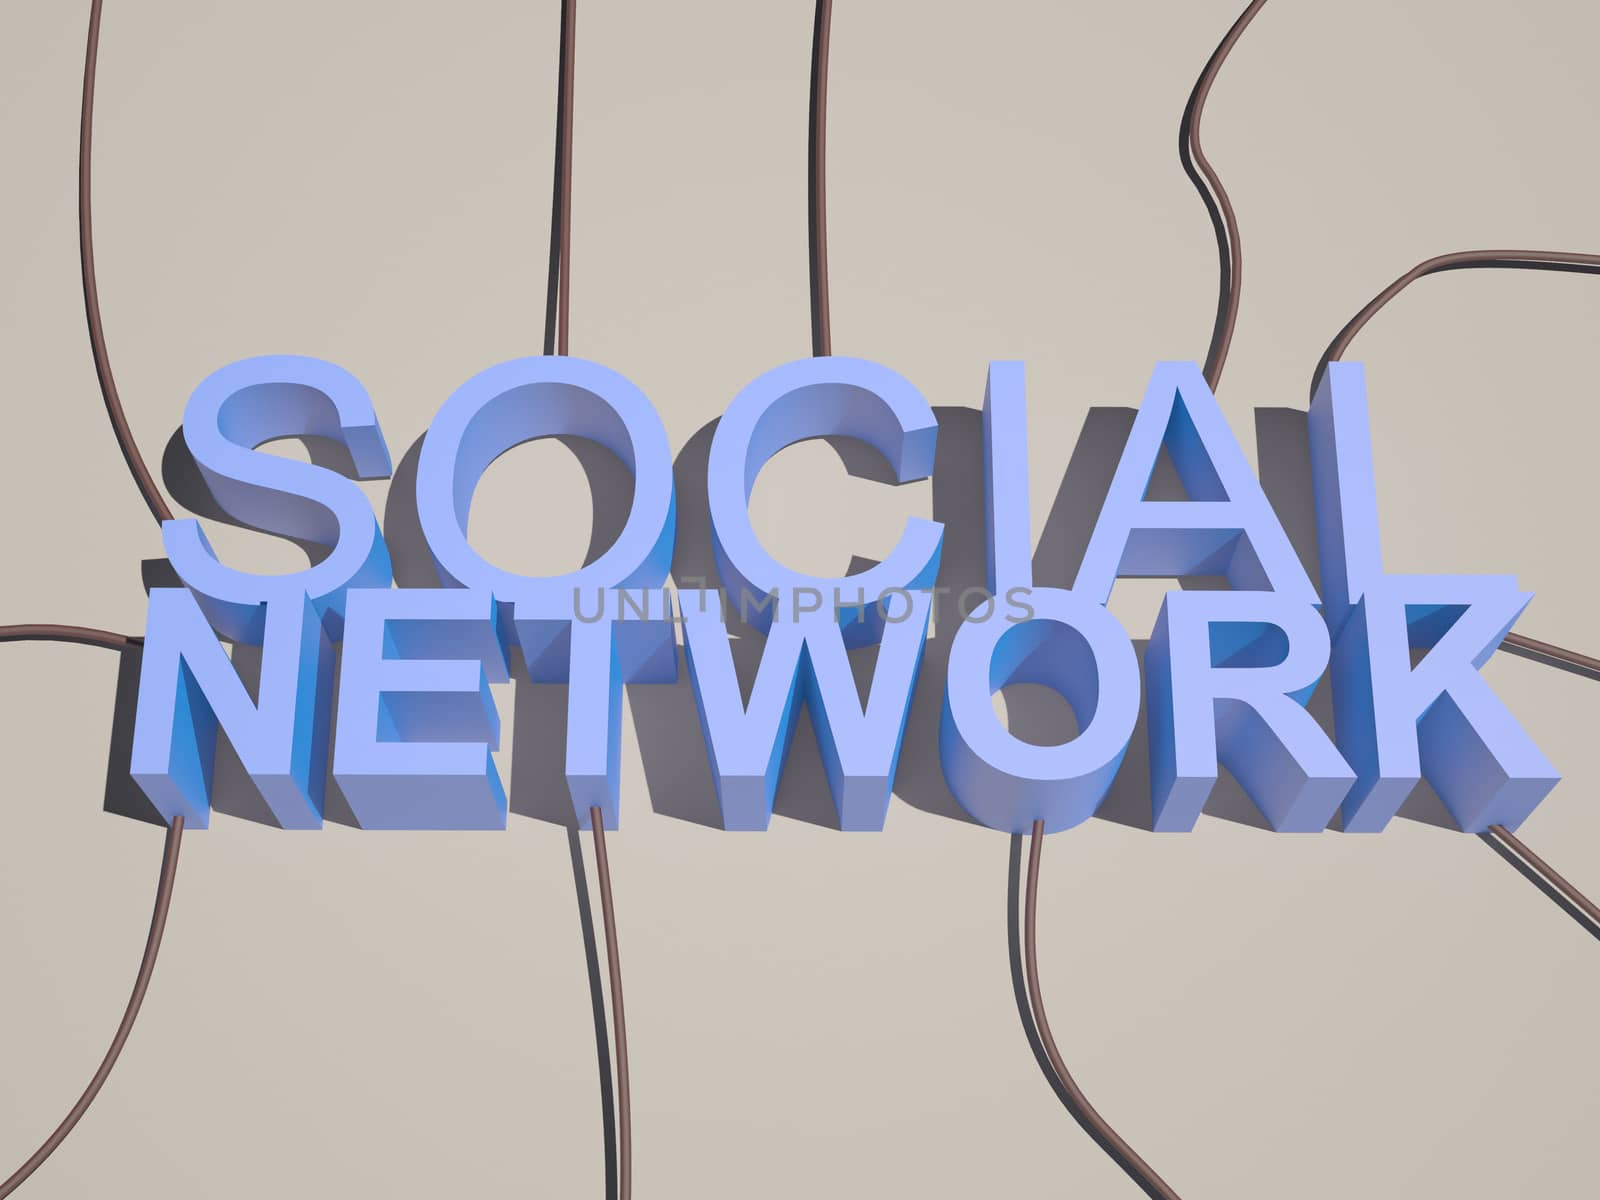 3d social network text connected with wire from different directions